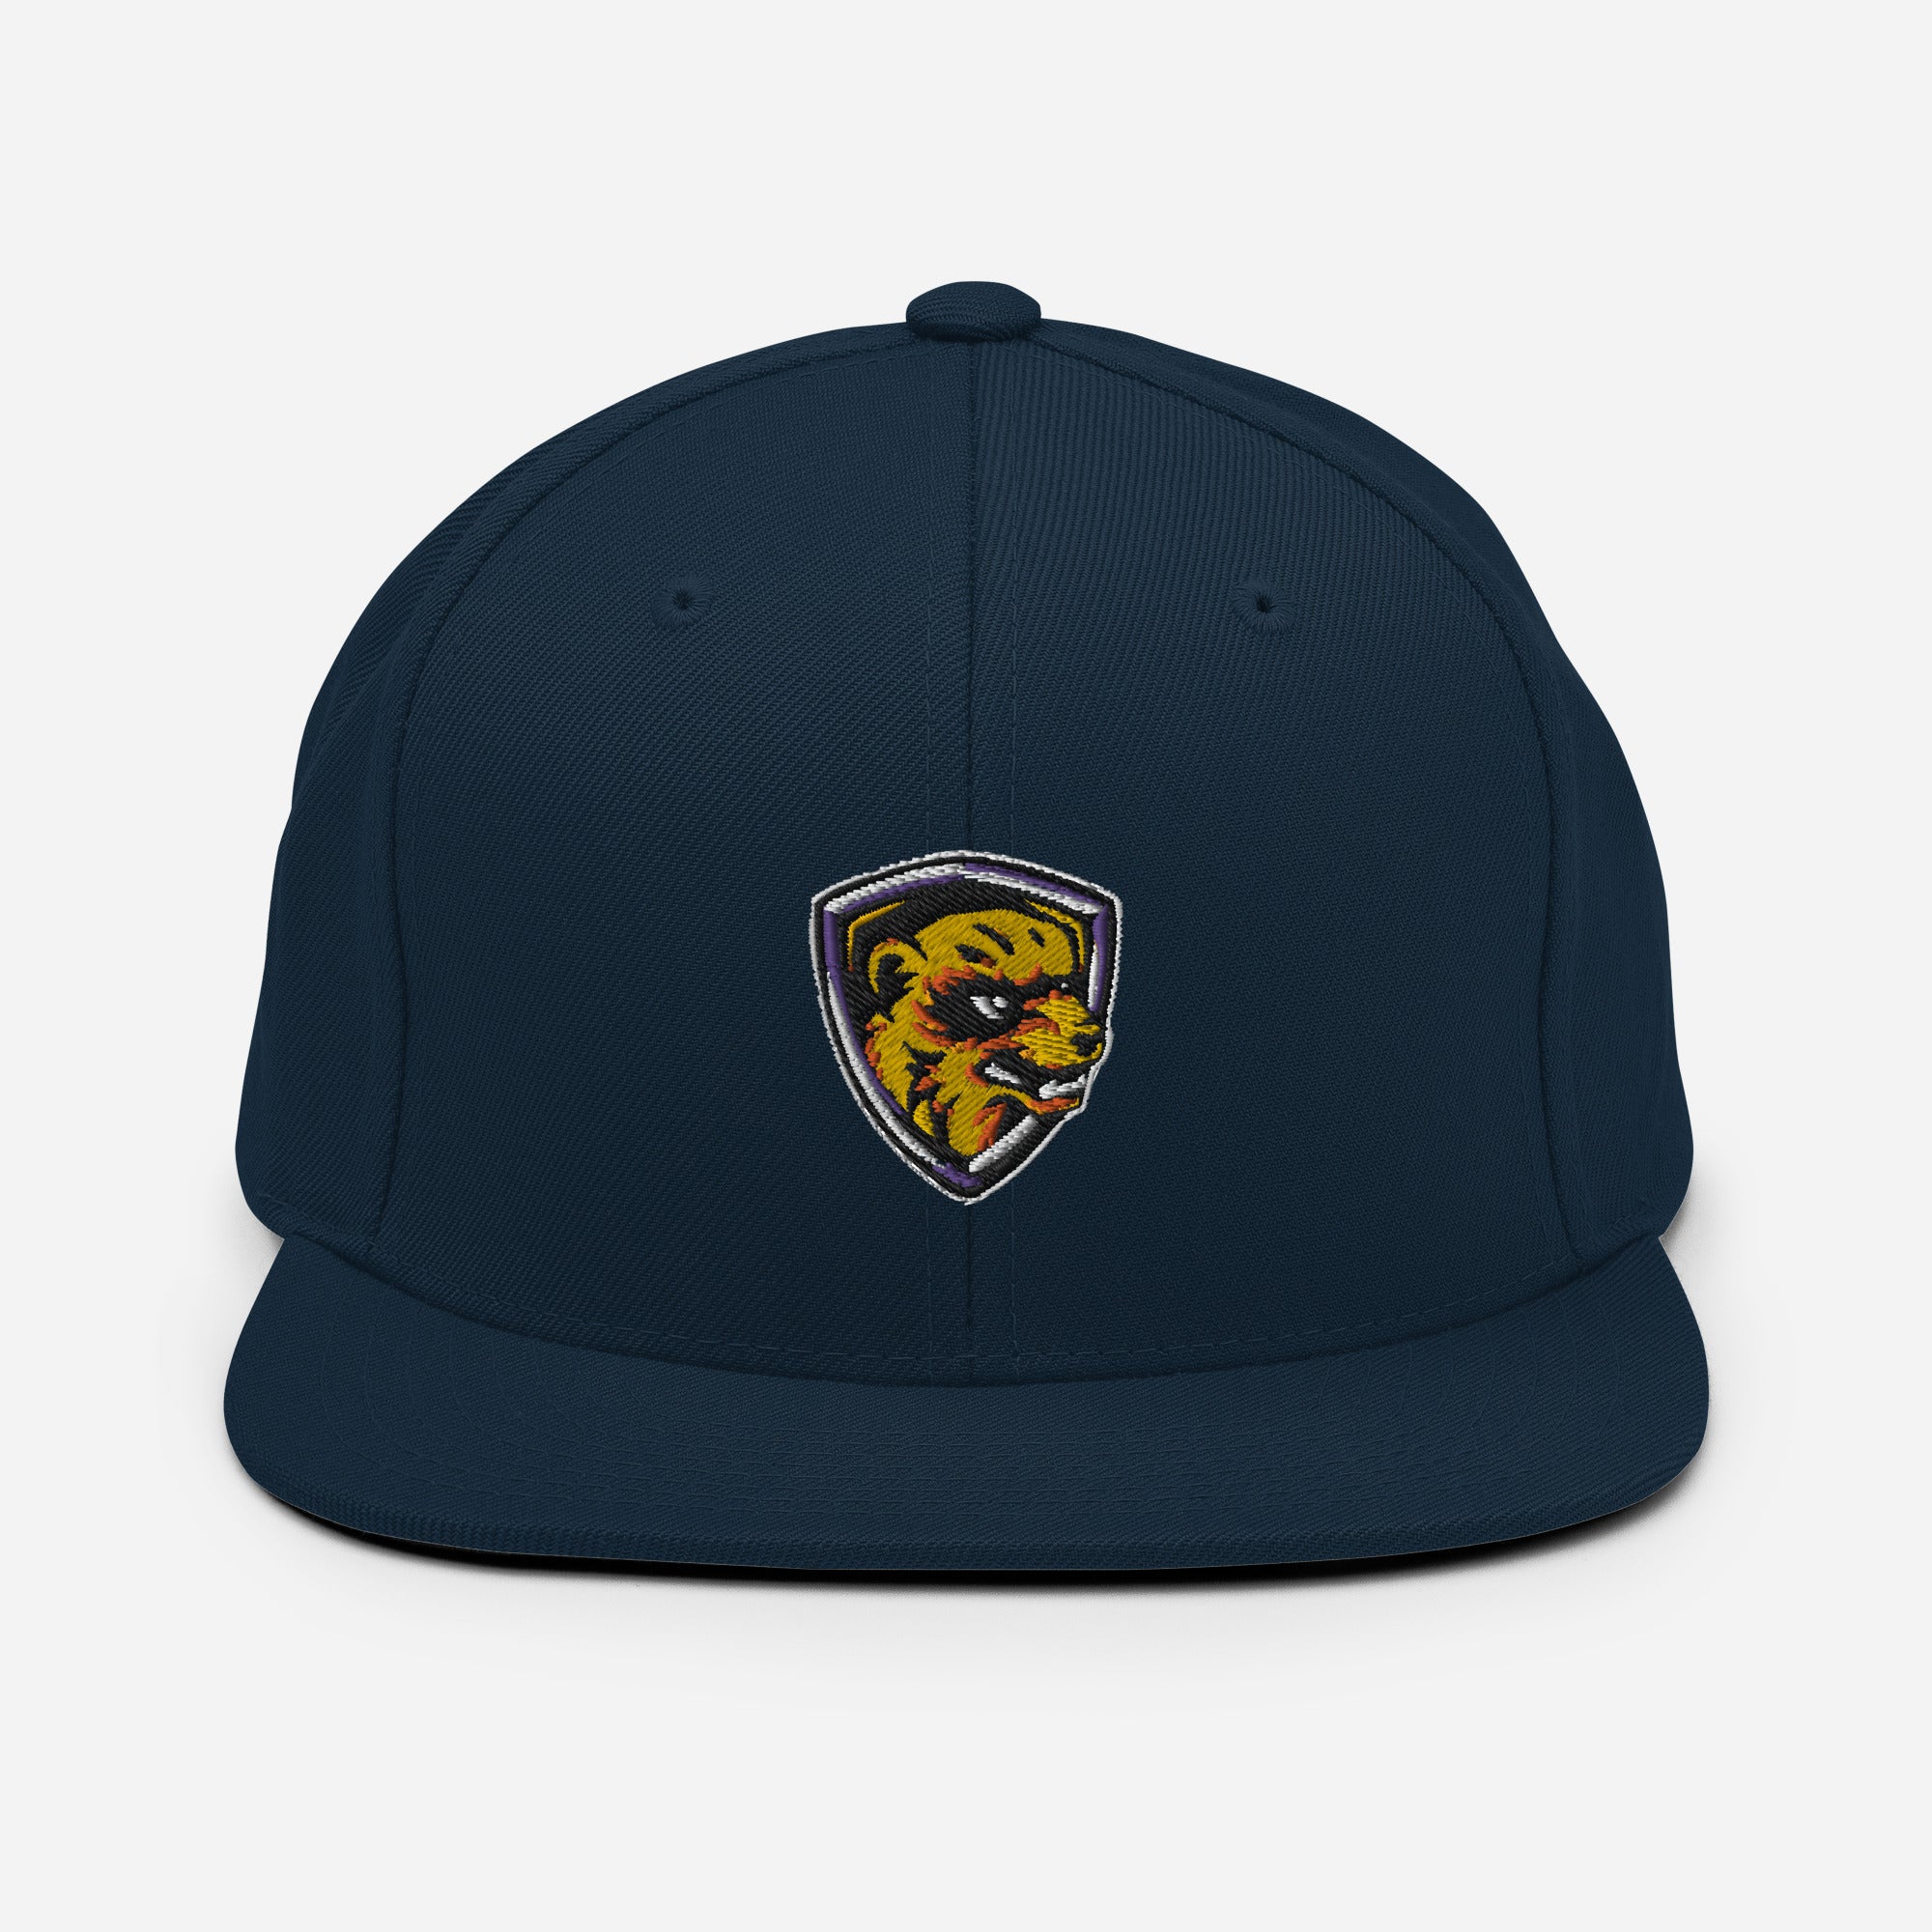 Jennings Community LC | On Demand | Embroidered Snapback Hat